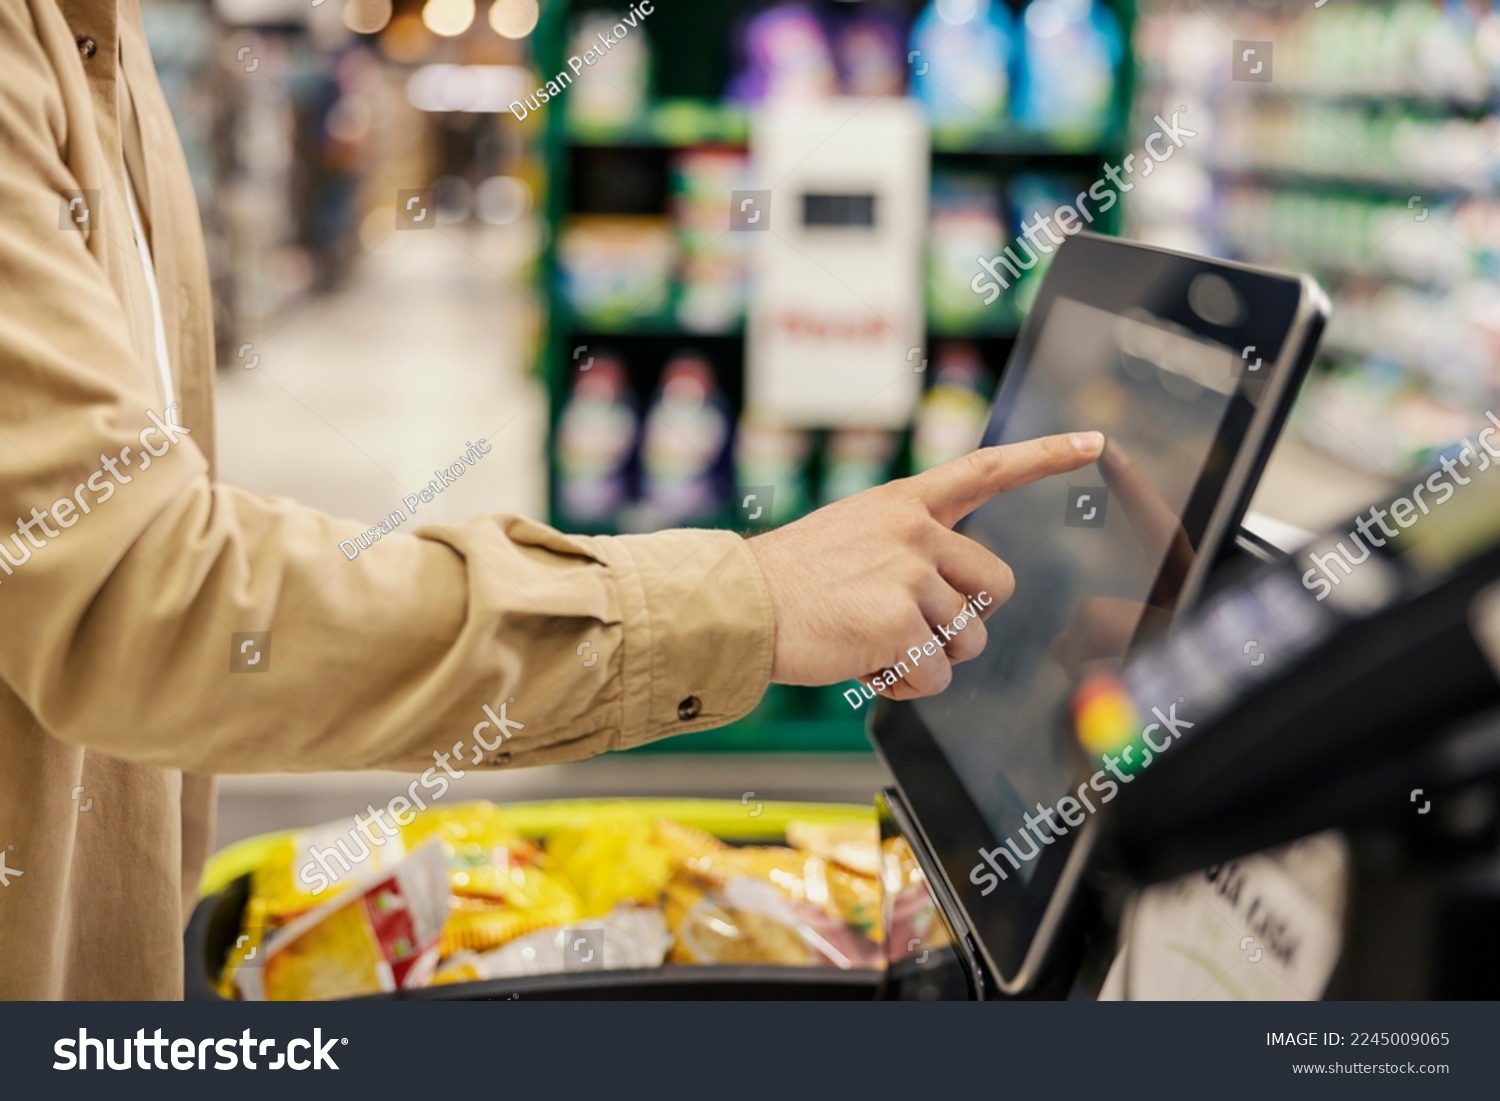 Hand of a man at self-service checkout in supermarket. #2245009065